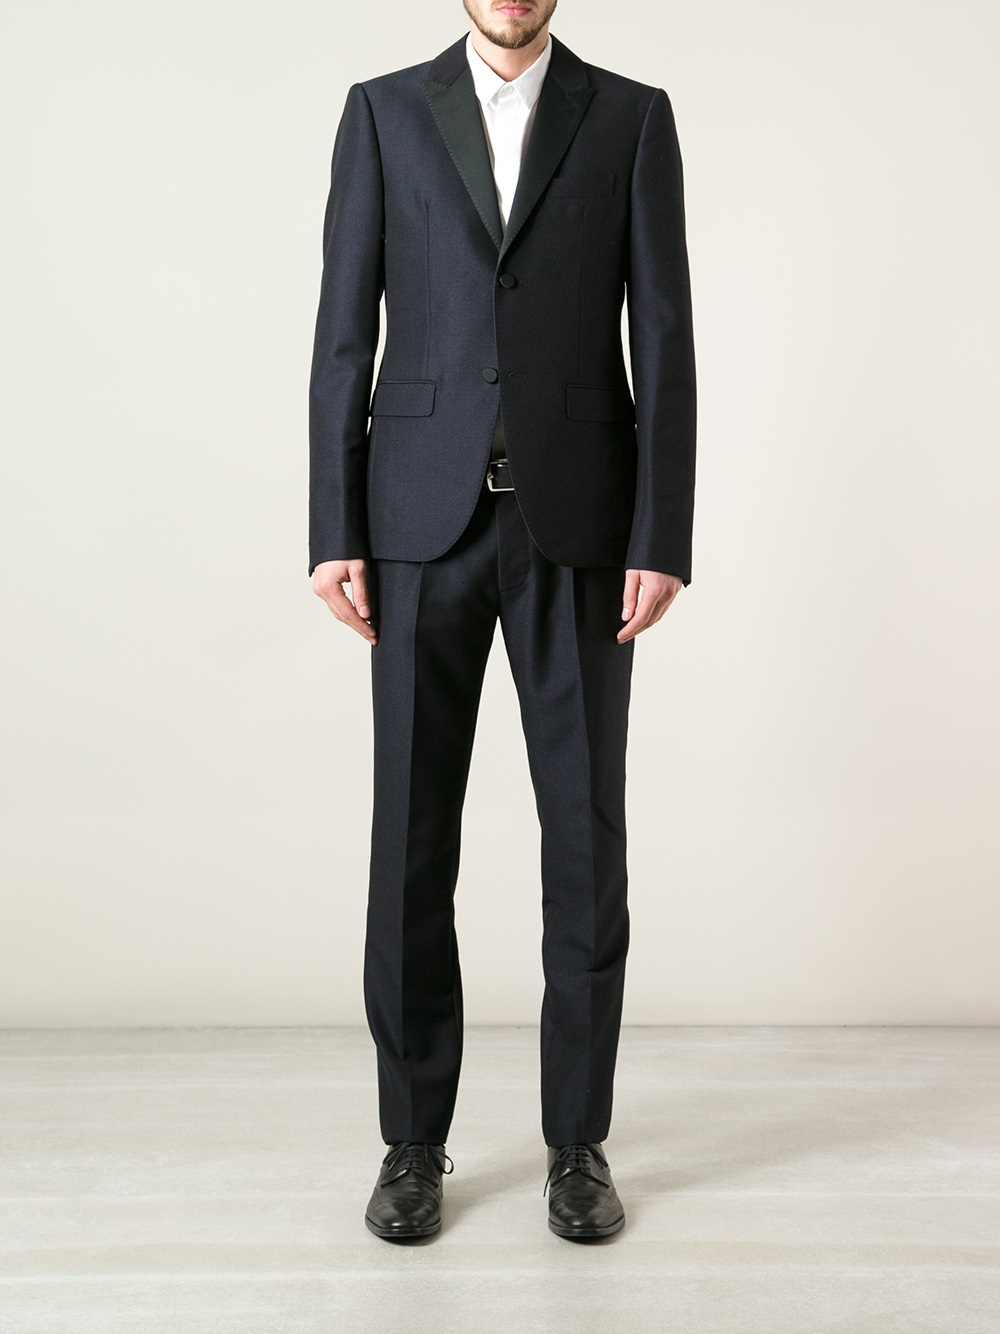 Lyst - Valentino Classic Smoking Suit in Blue for Men